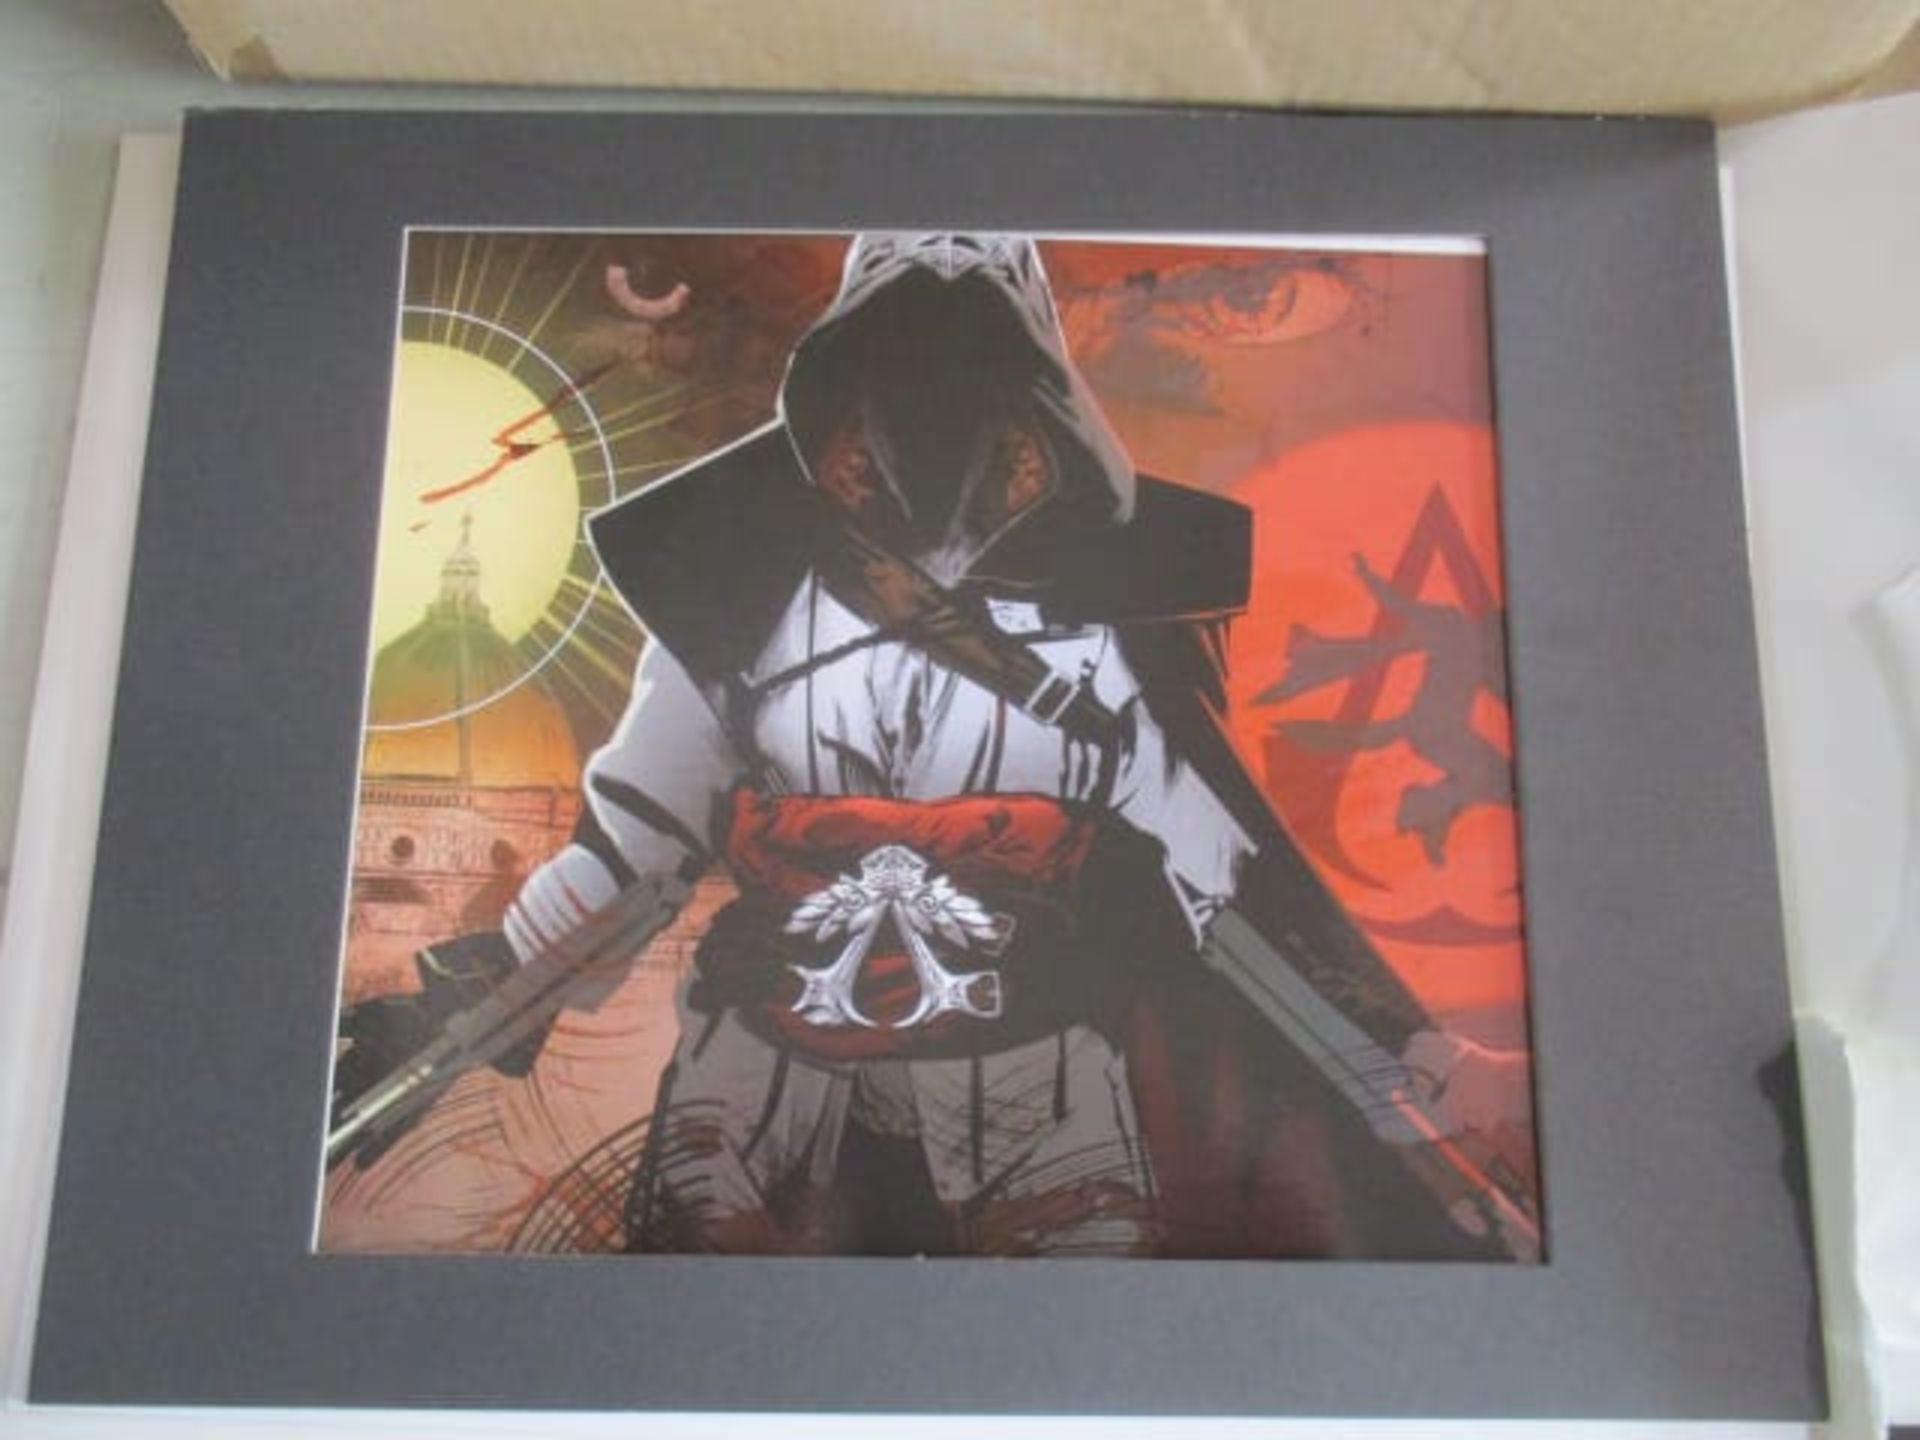 100 x Assasins Creed Lithographic Prints - Image 4 of 4